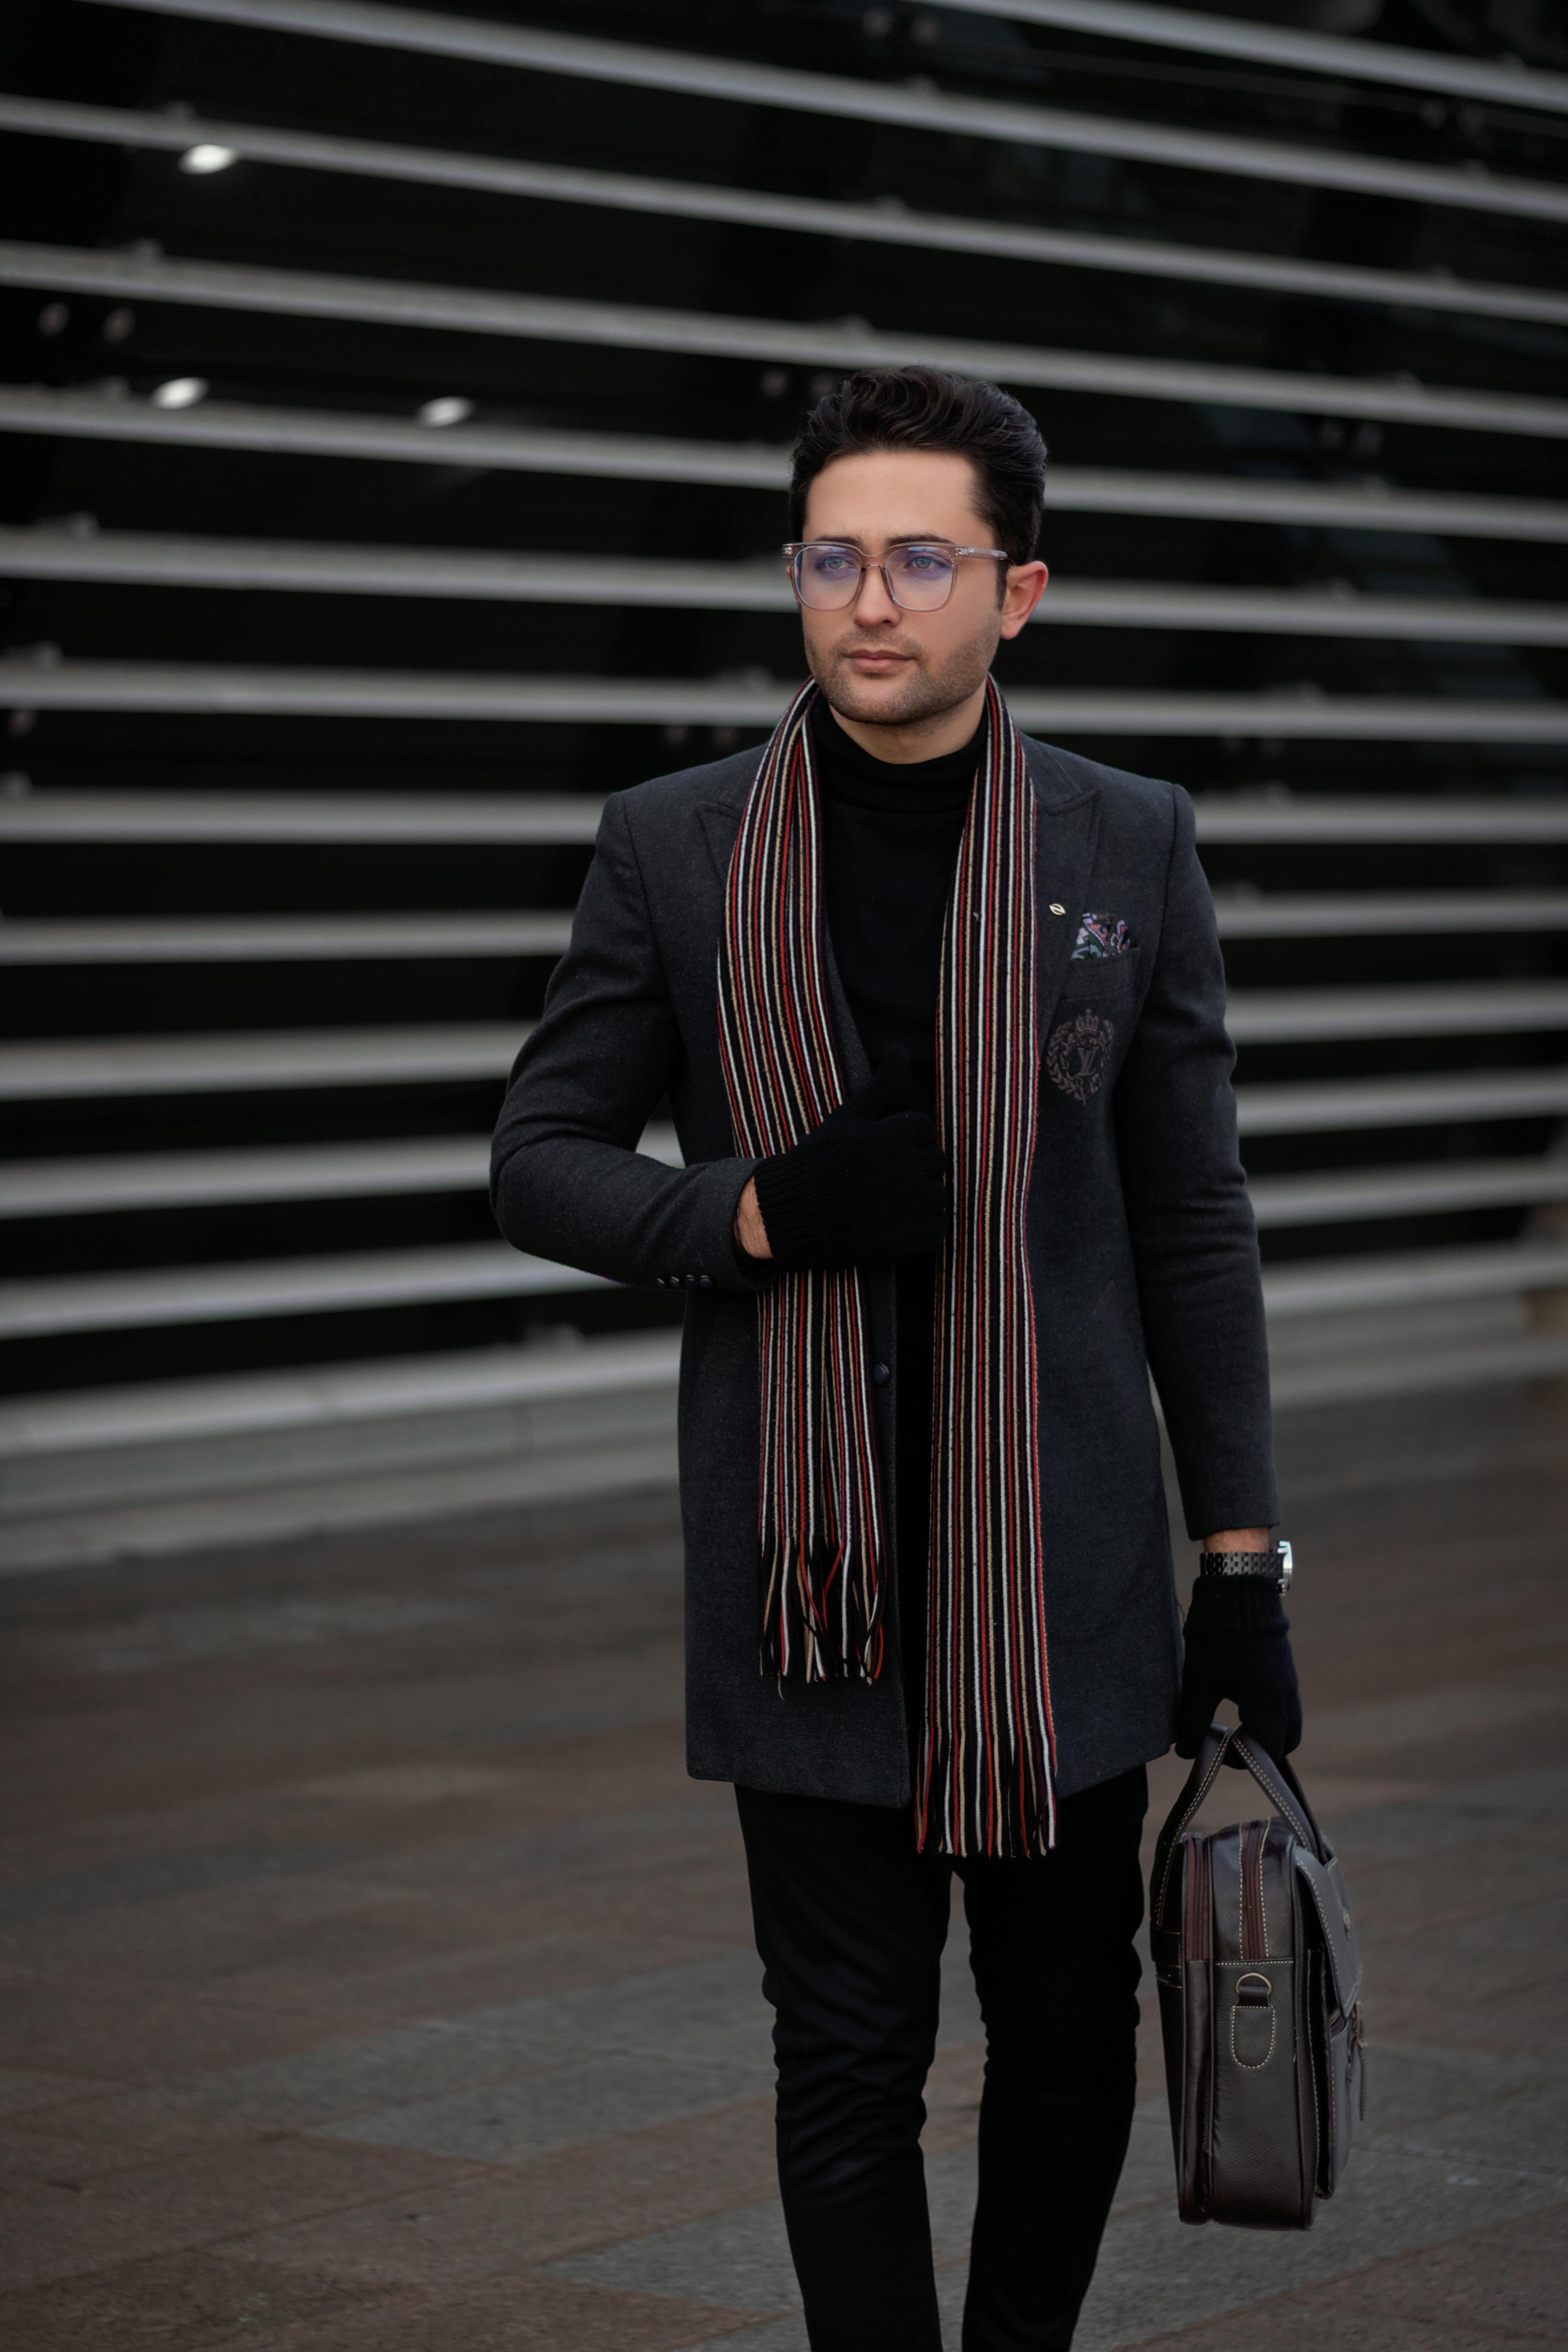 City Chic: Red Scarf and Suit